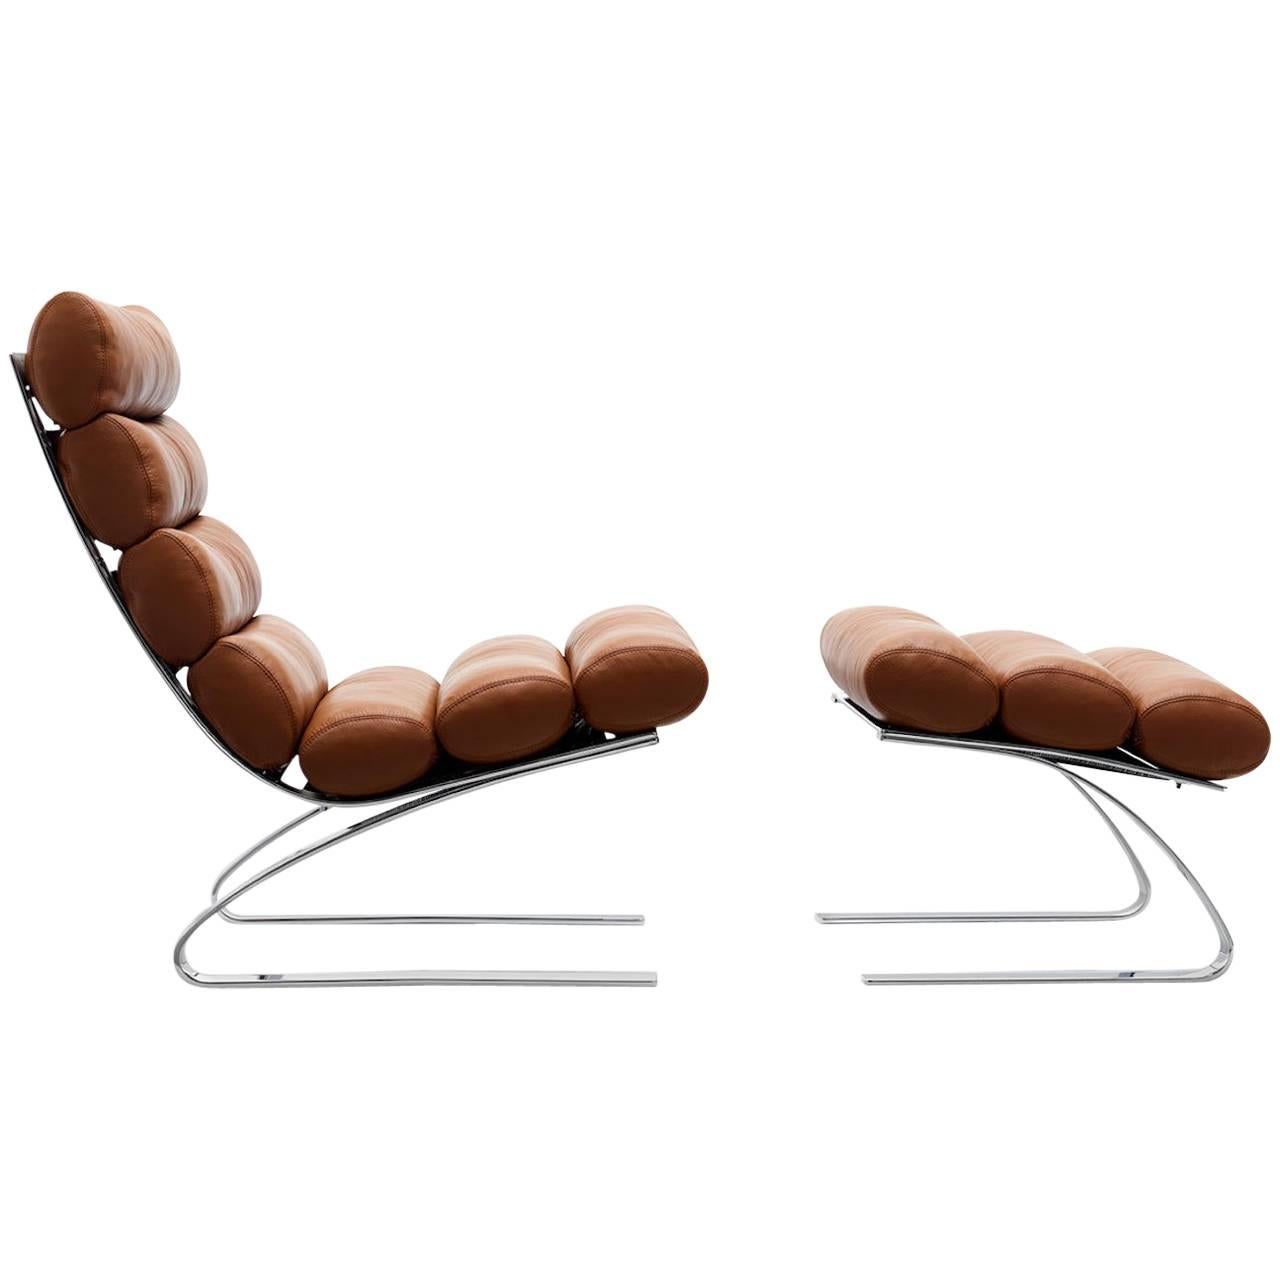 COR Sinus Lounge Chair with Ottoman with or Without Arms in Fabric or Leather For Sale